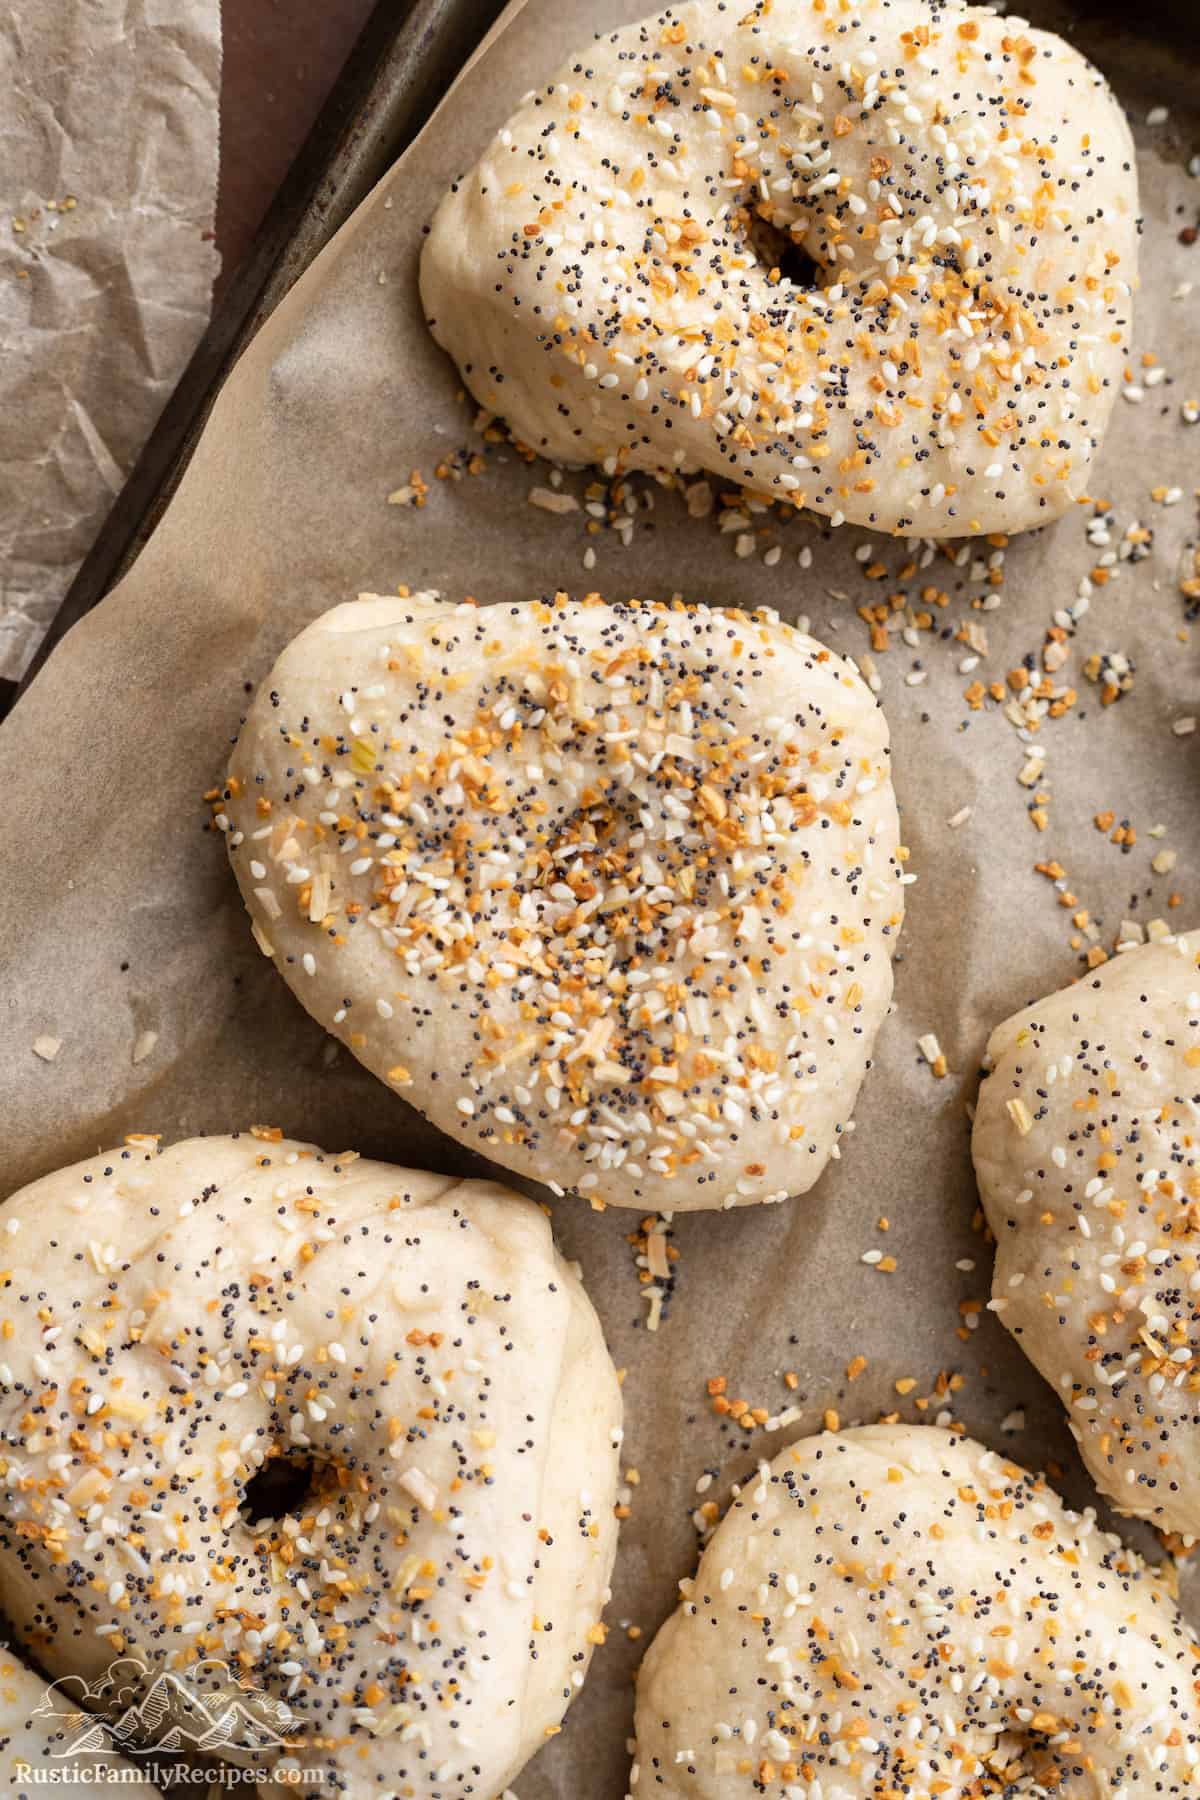 Raw bagels after boiling, sprinkled with everything bagel seasoning